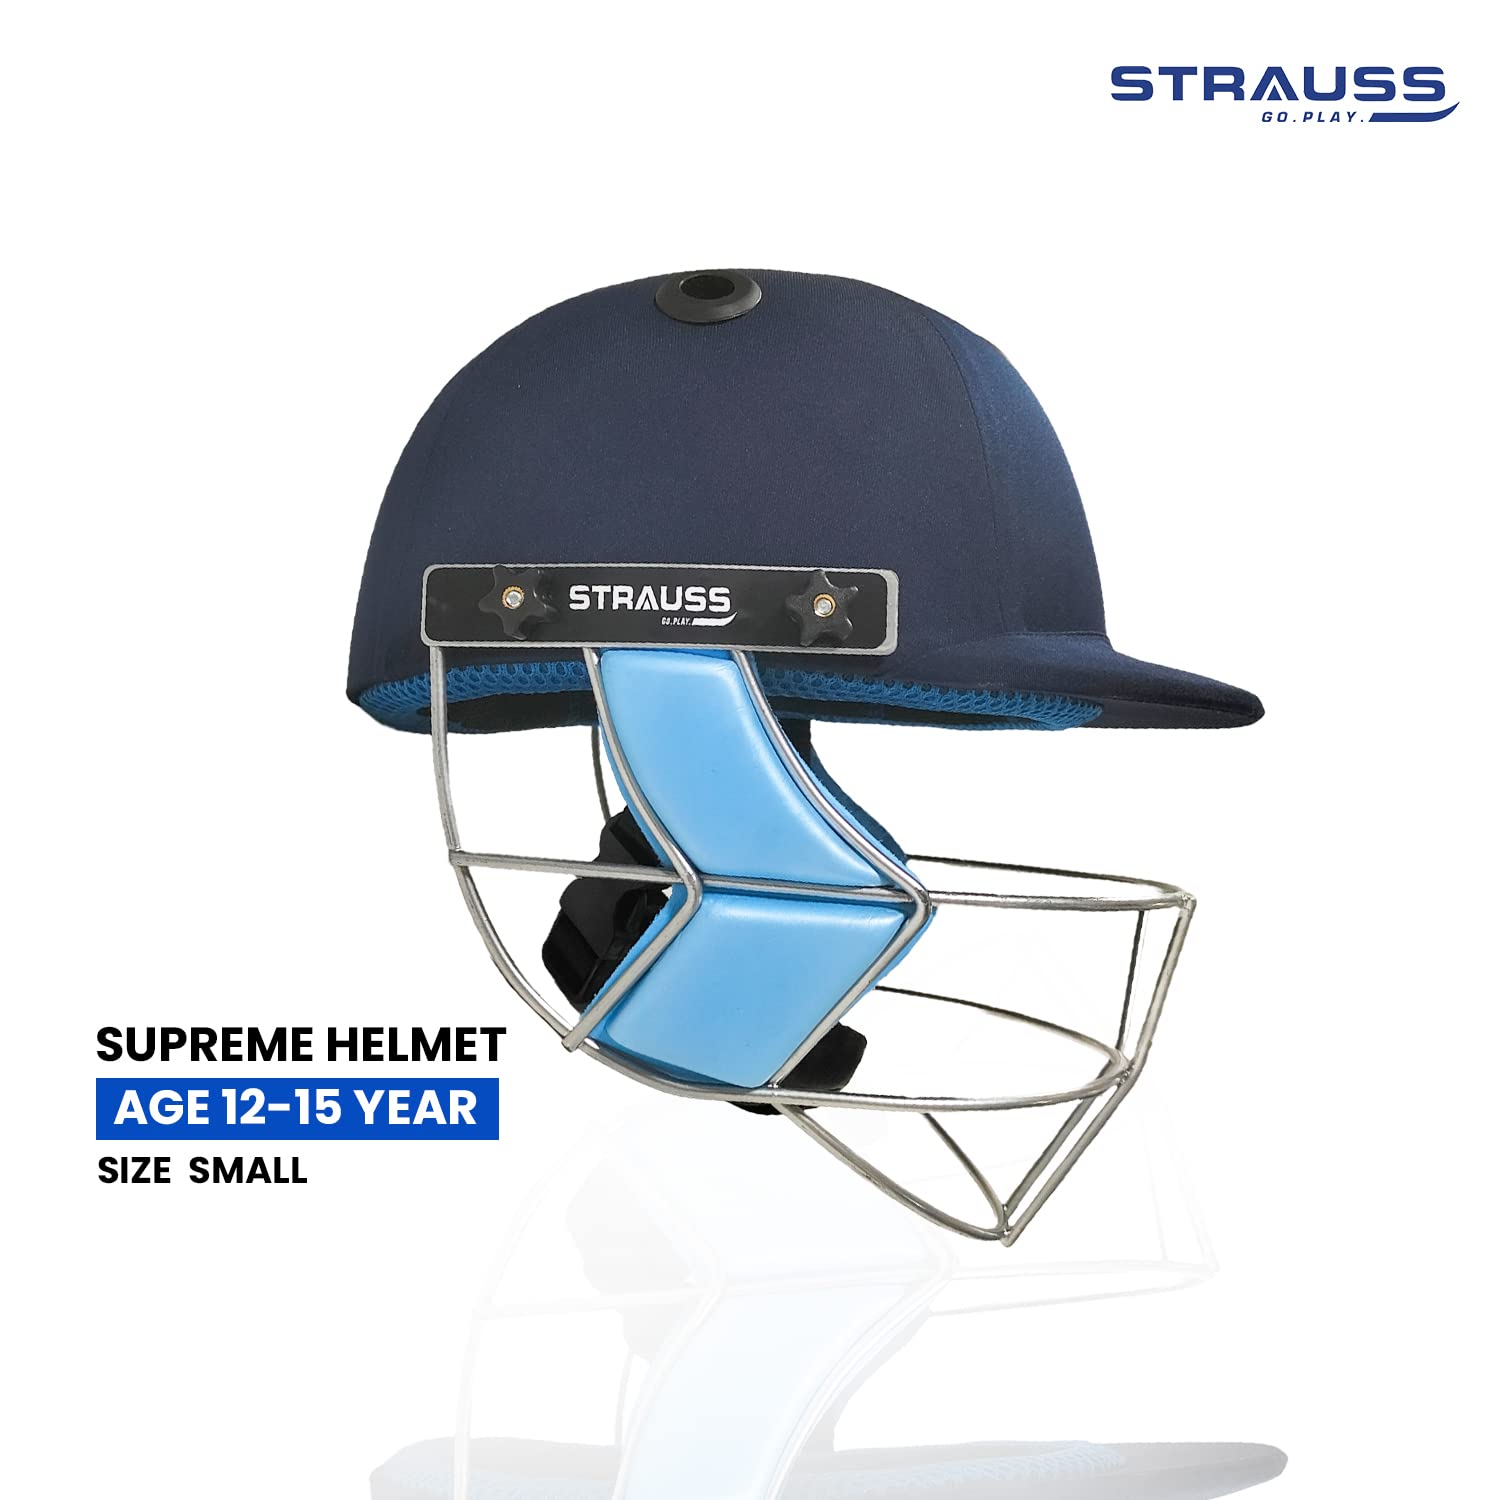 Strauss Supreme Cricket Helmet with Detachable Steel Grill |Size-Small, Age Group (12-15 Years)